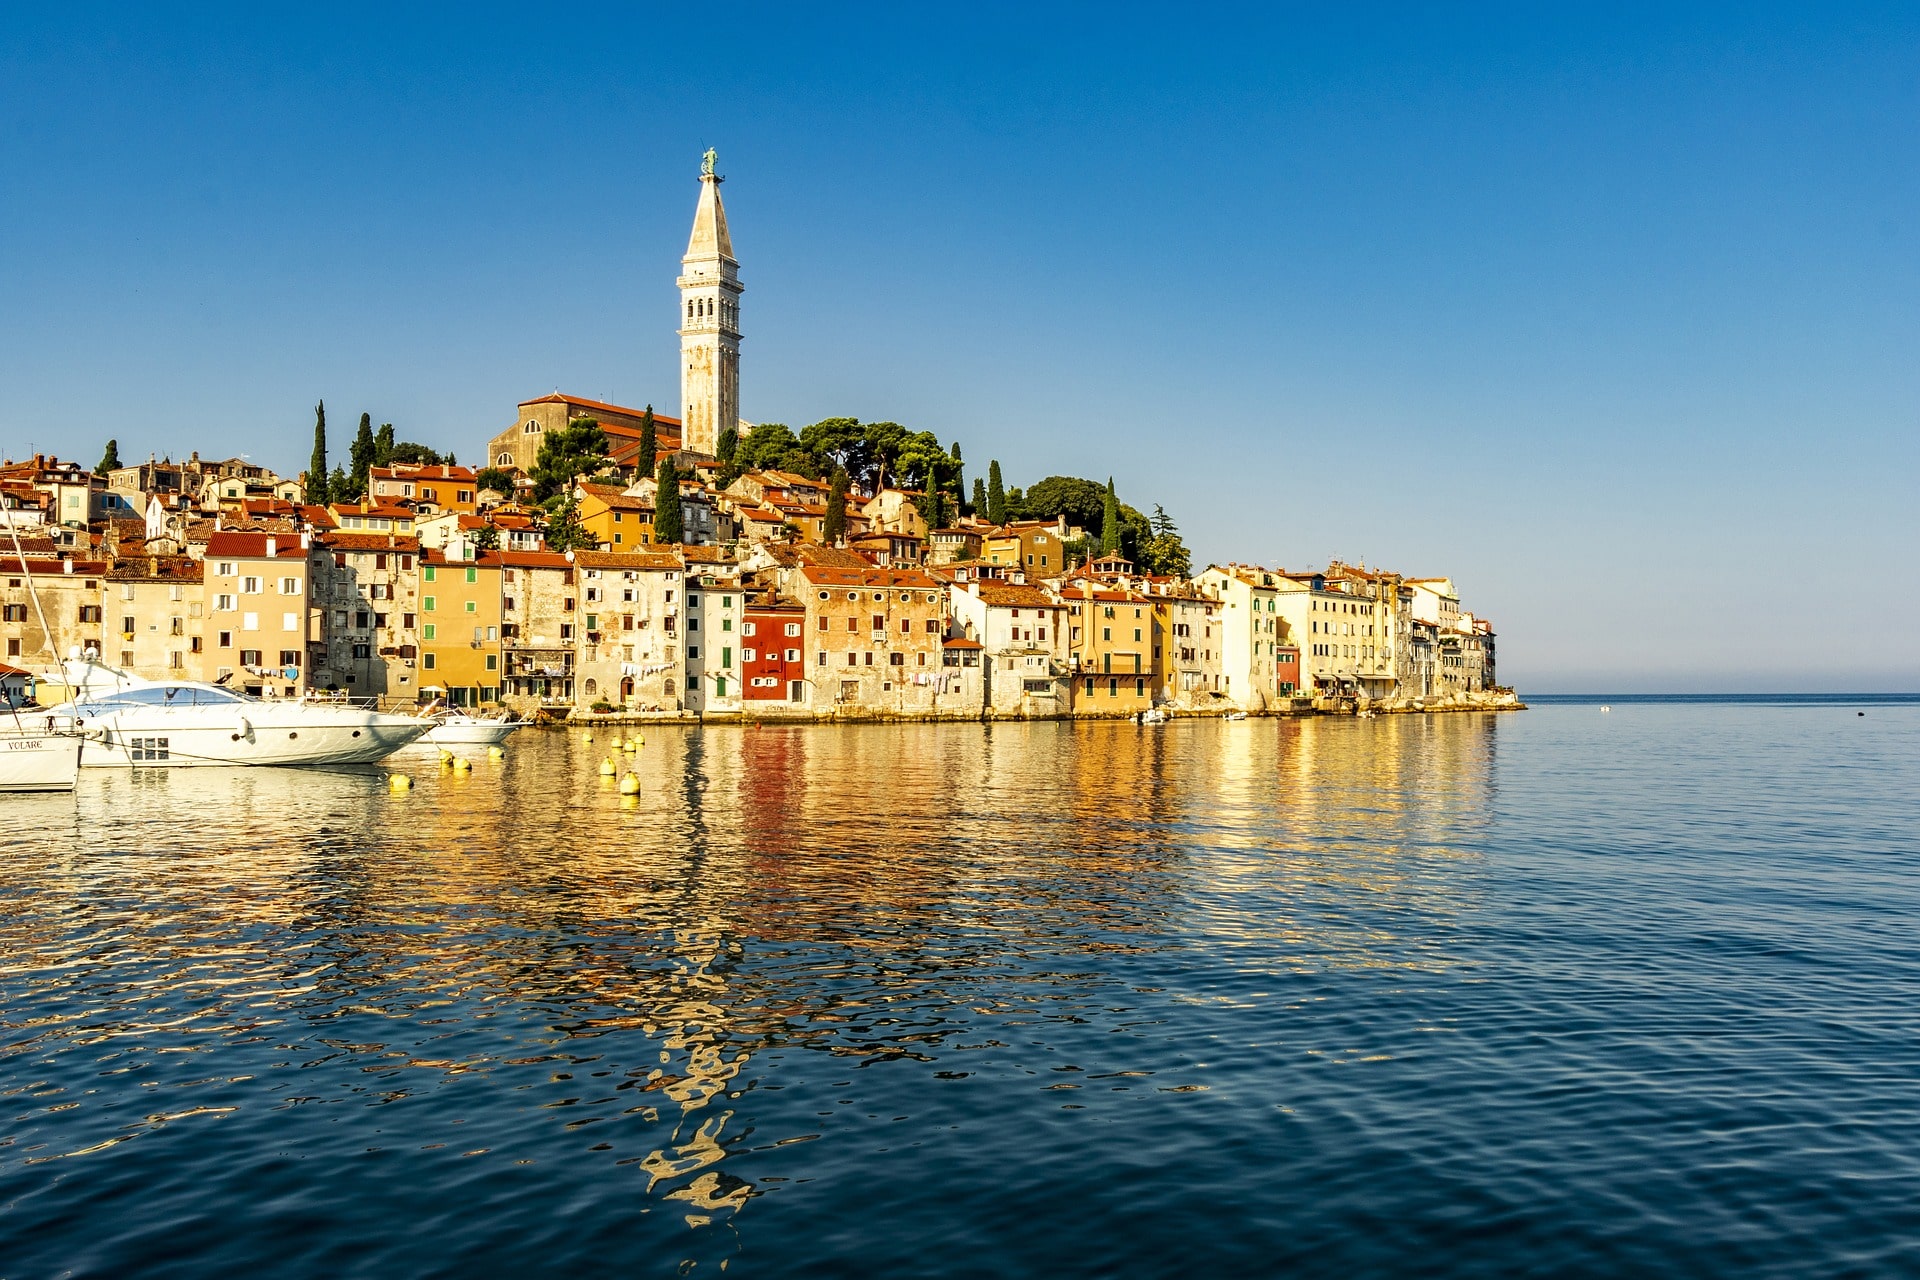 Rovinj is one of the most relaxing places to visit in Croatia